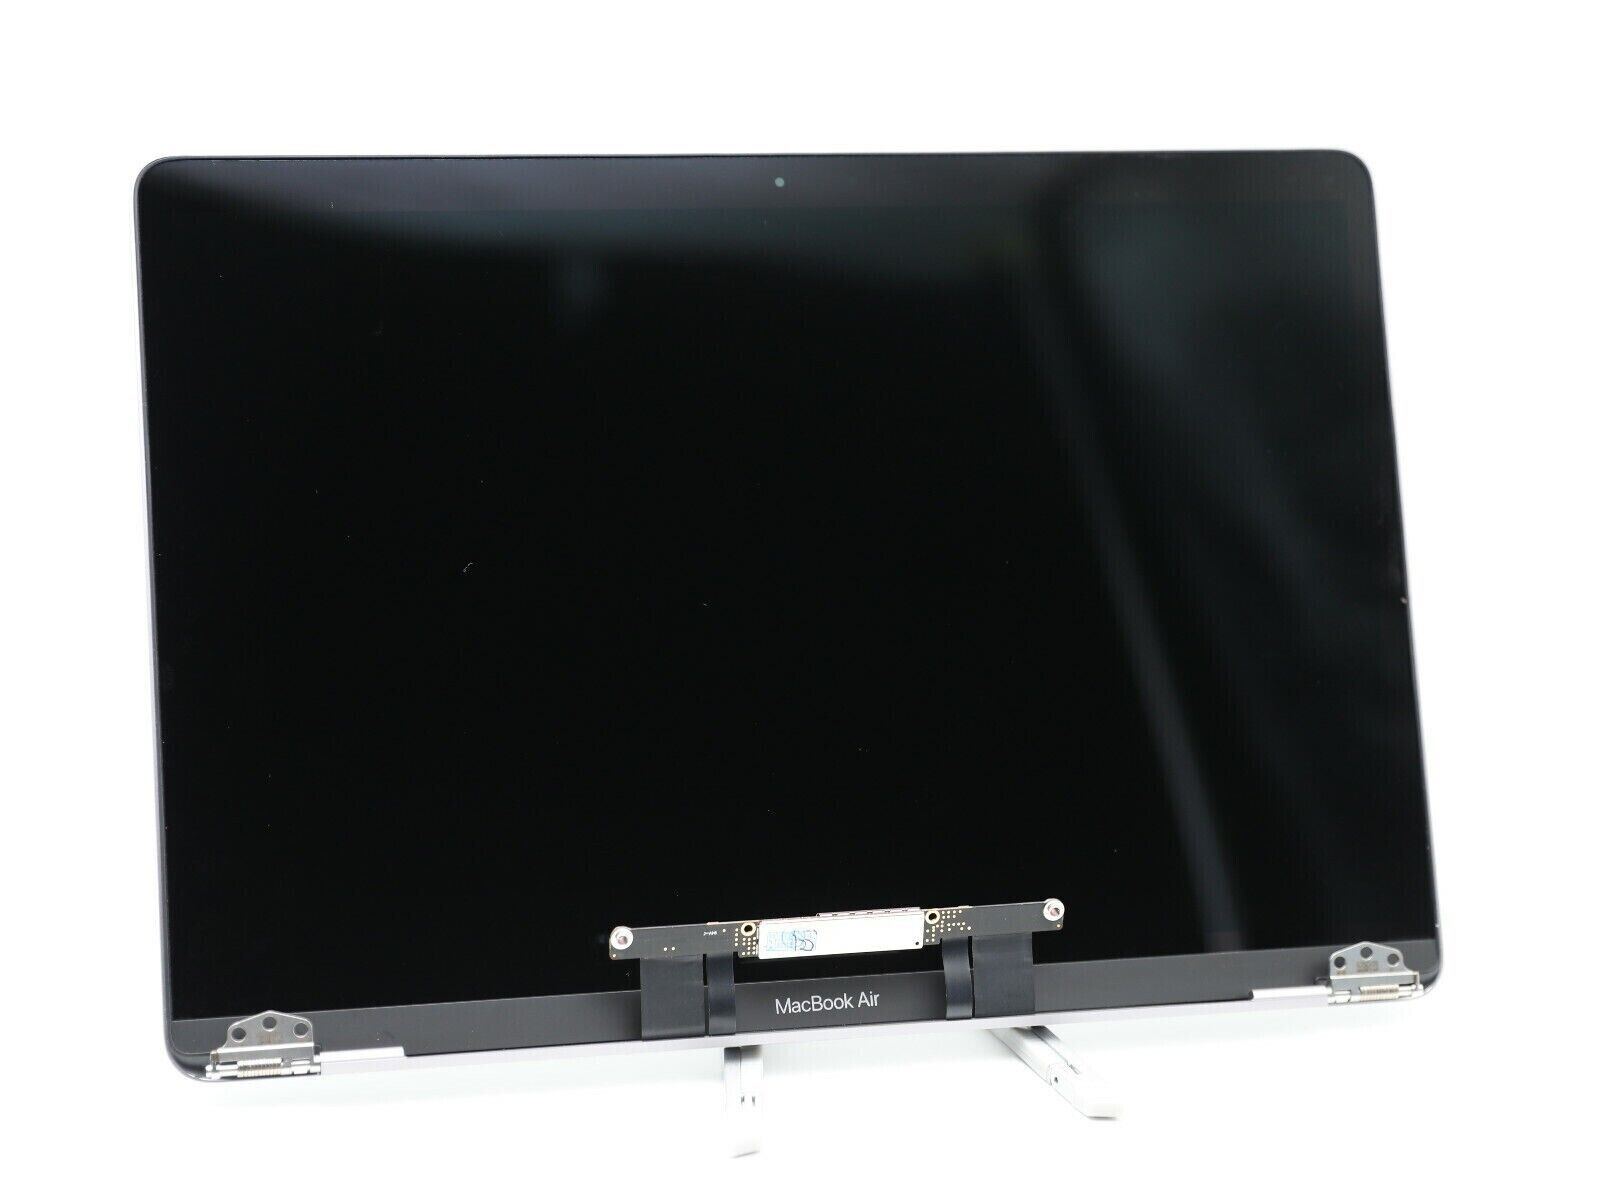 MACBOOK AIR LCD LATE 2018 USED WORKING 100% GRAY COLOR CONDITION GOOD GRADE A